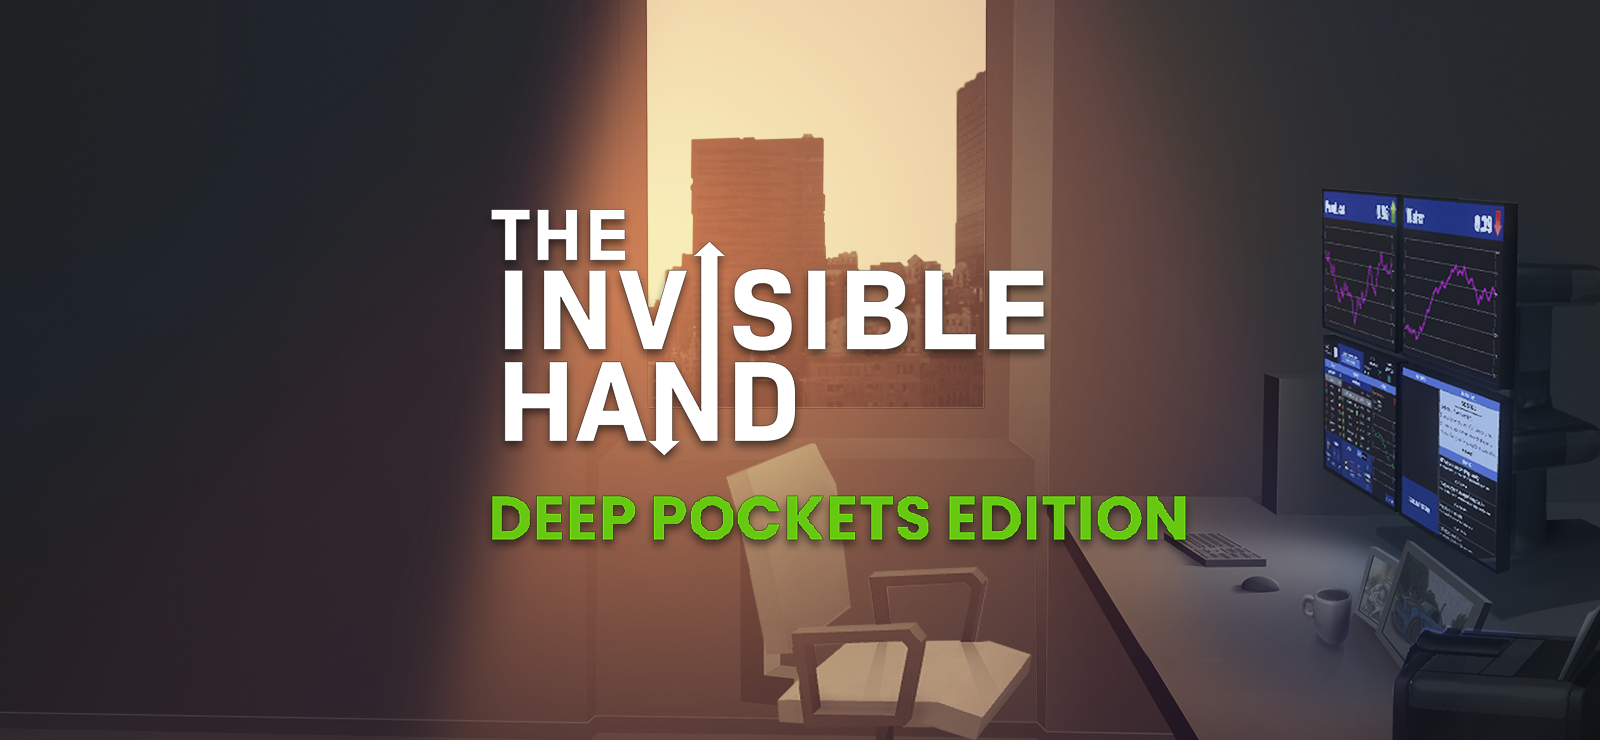 The Invisible Hand - Deep Pockets